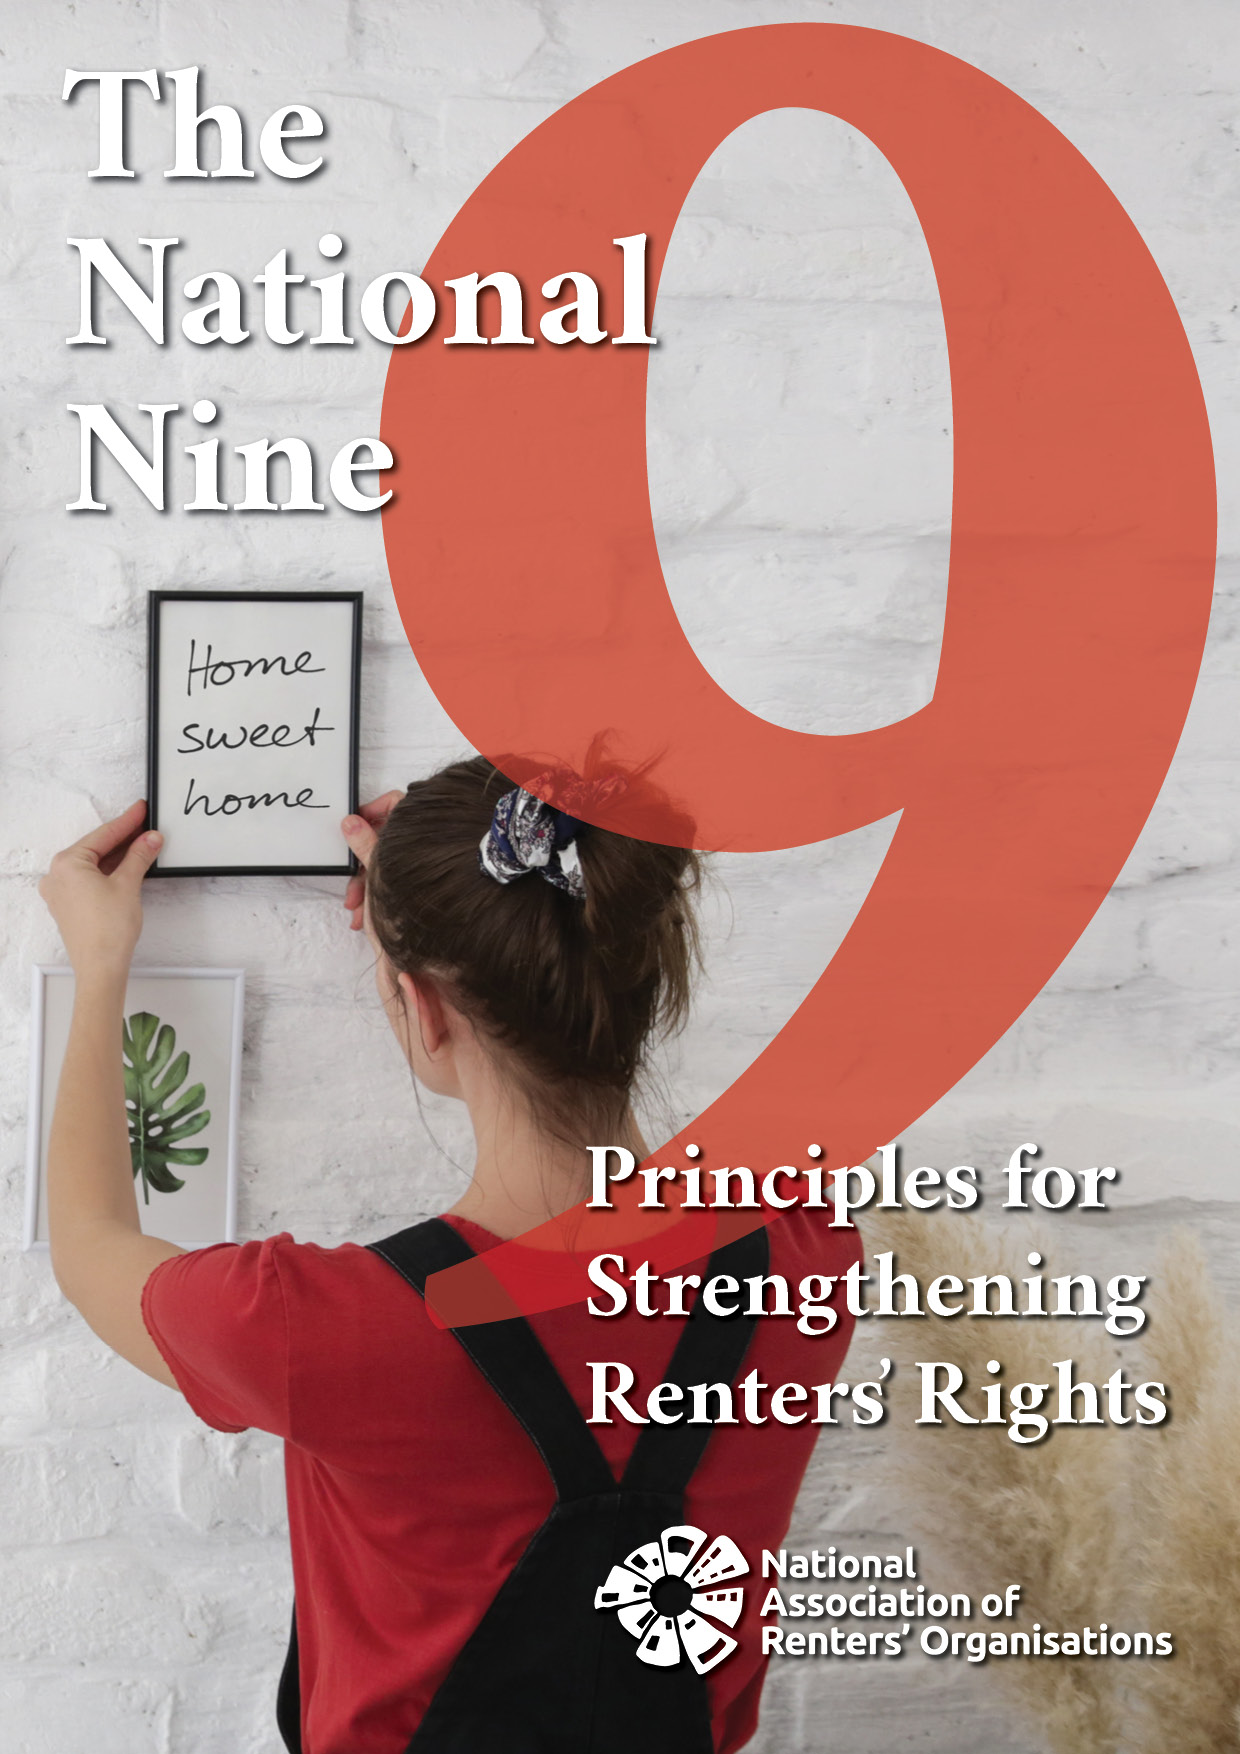 The National Nine: Principles for Strengthening Renters' Rights